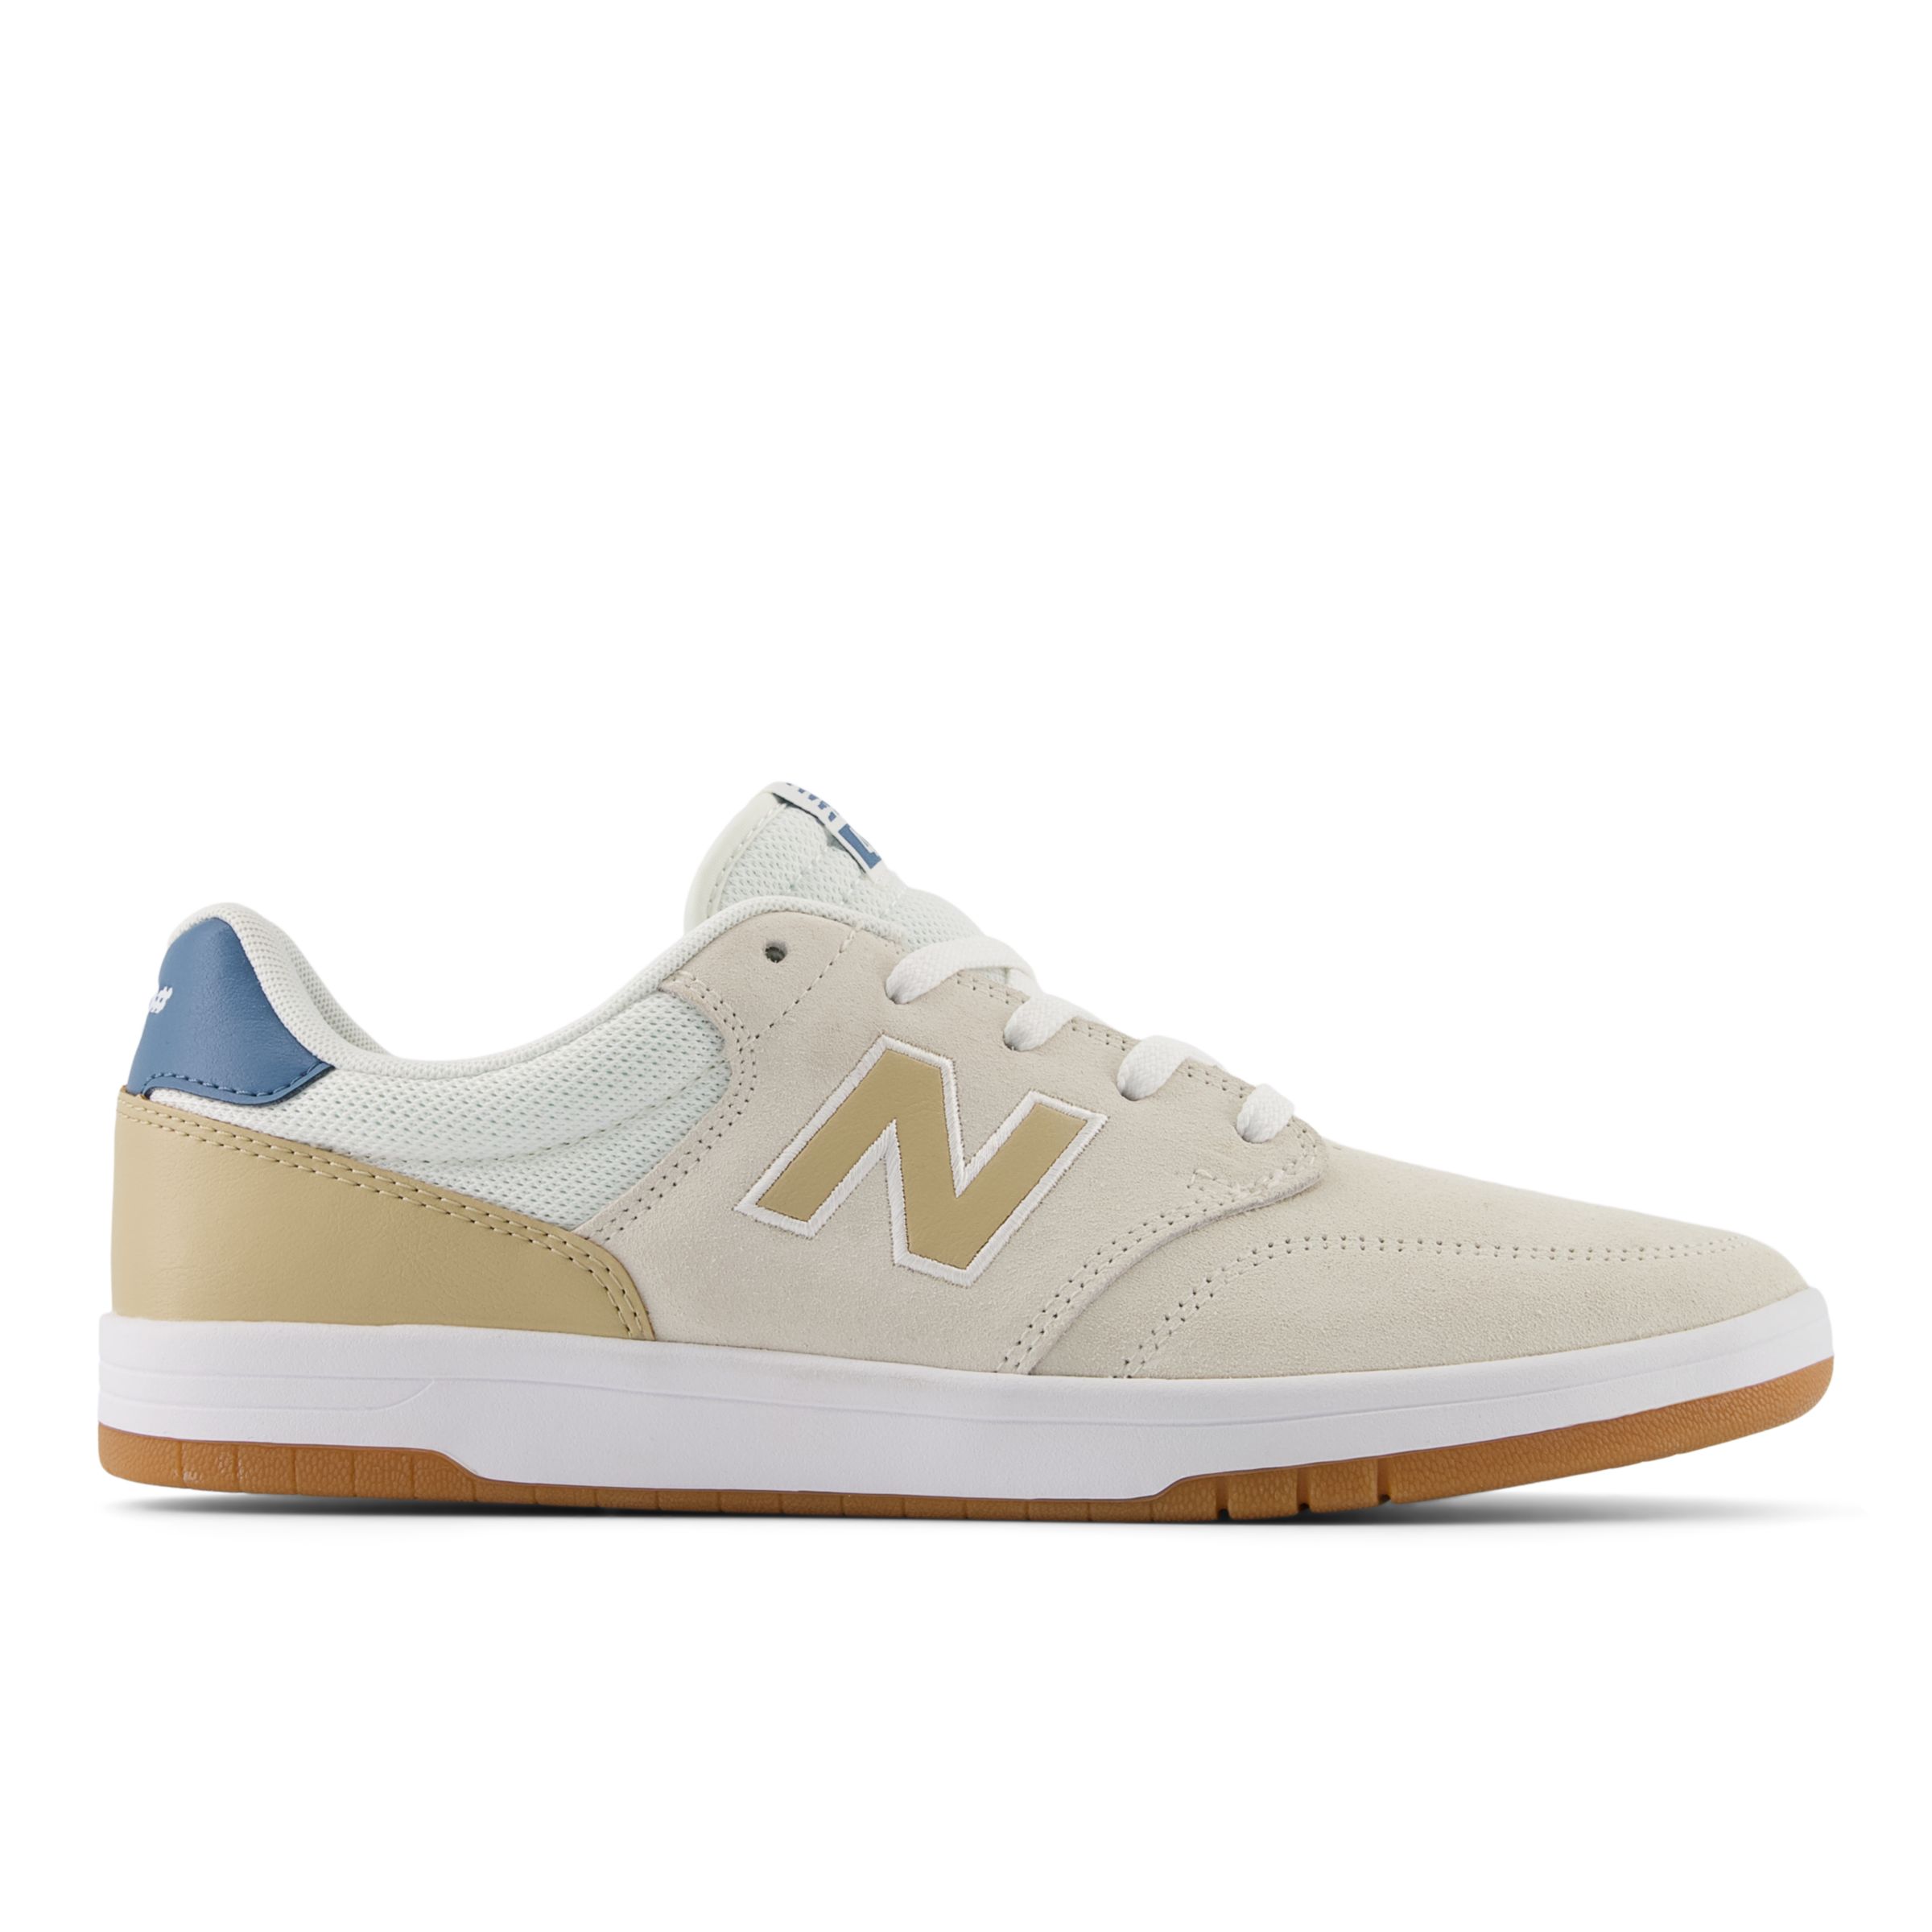 New Balance Men's NB Numeric 425 in White/Beige Synthetic, size 7.5